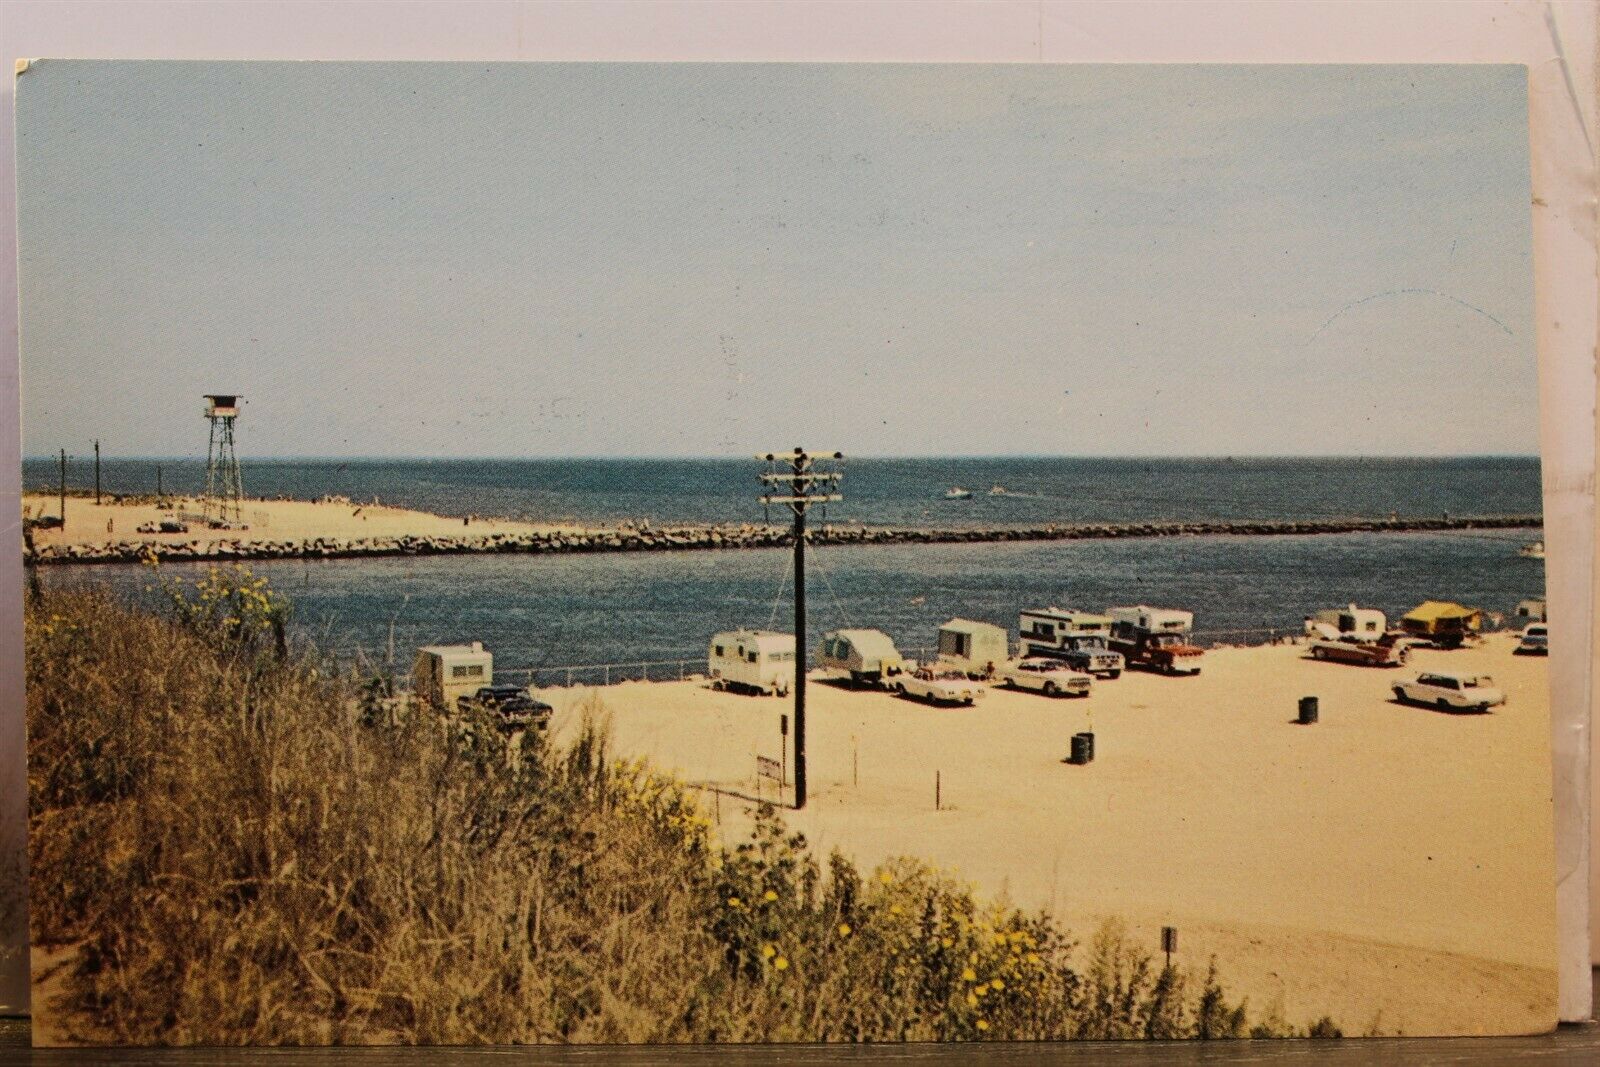 Delaware De Indian River Inlet Greetings Park Trailers Campers Postcard Old View